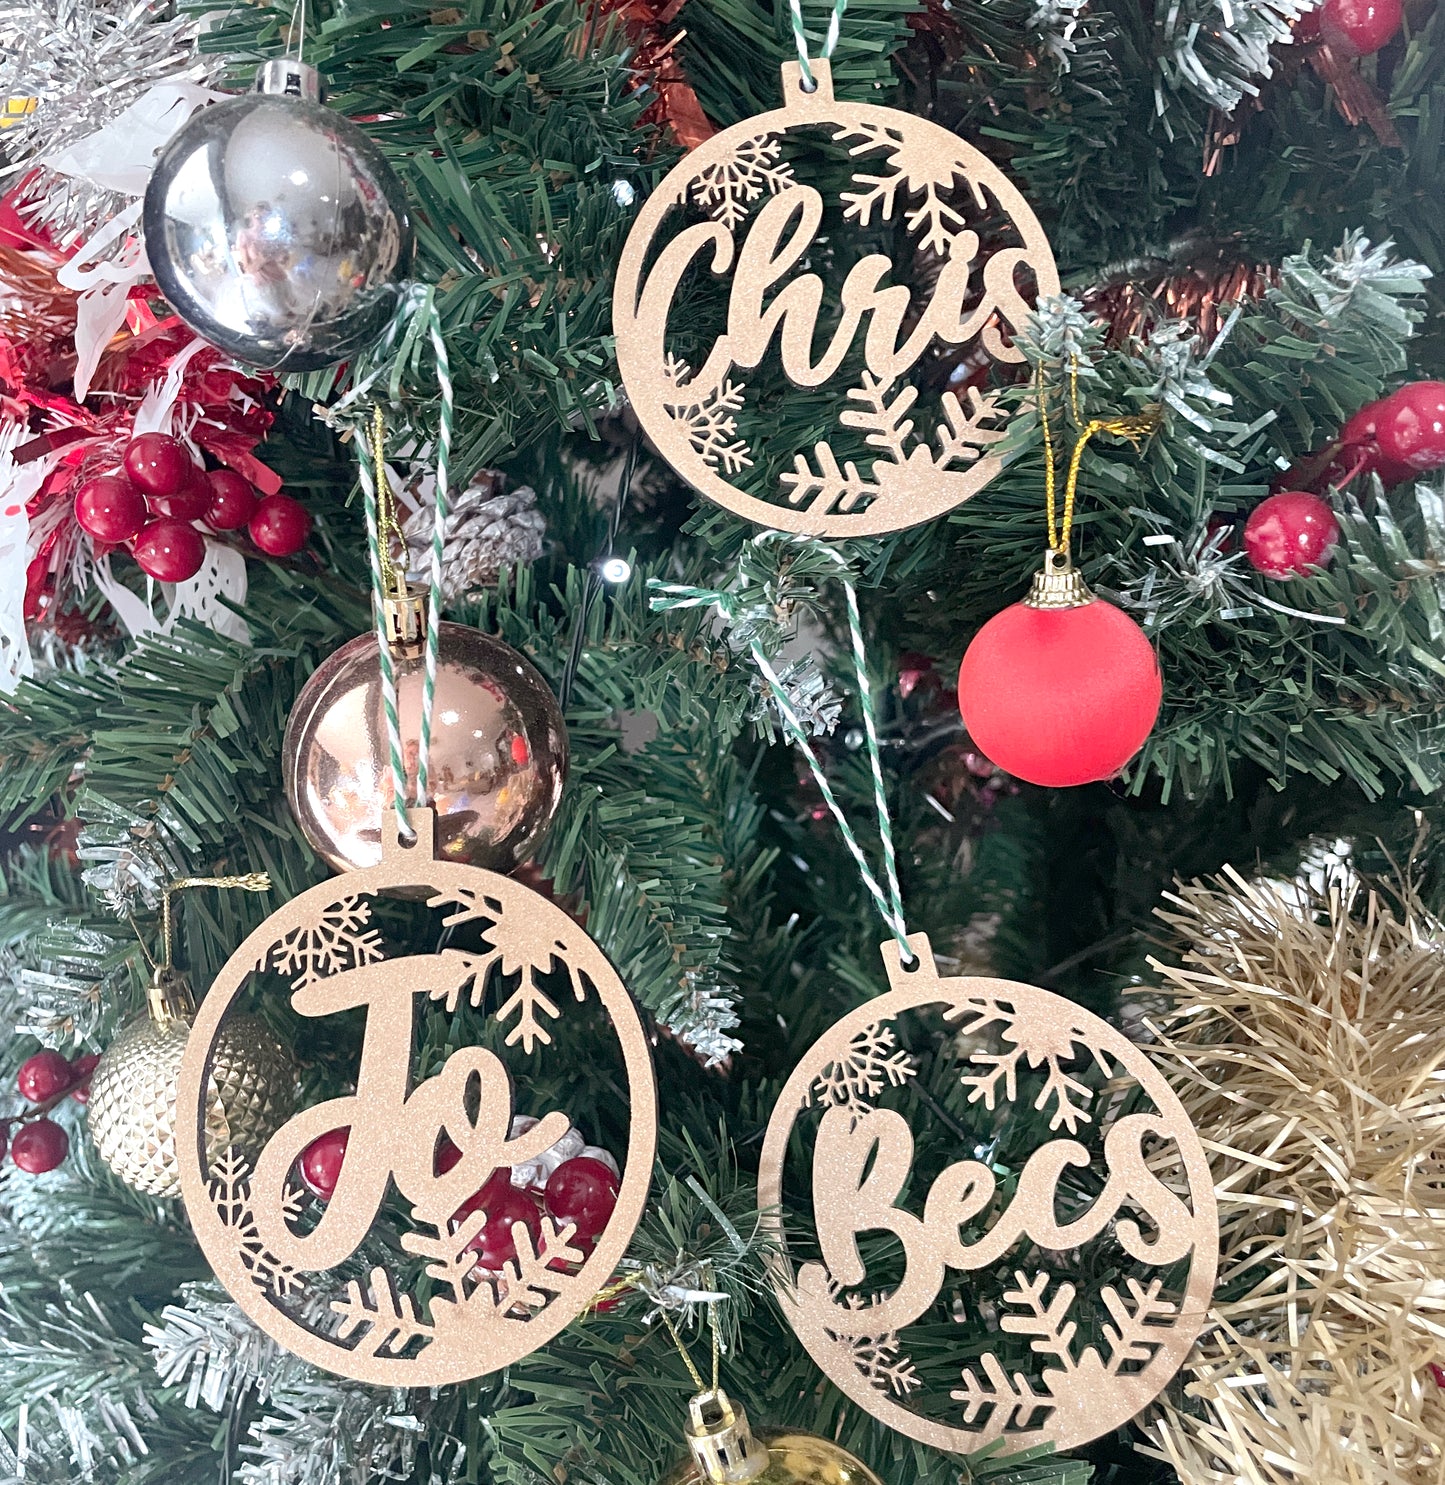 Personalised name cut out wooden snow bauble